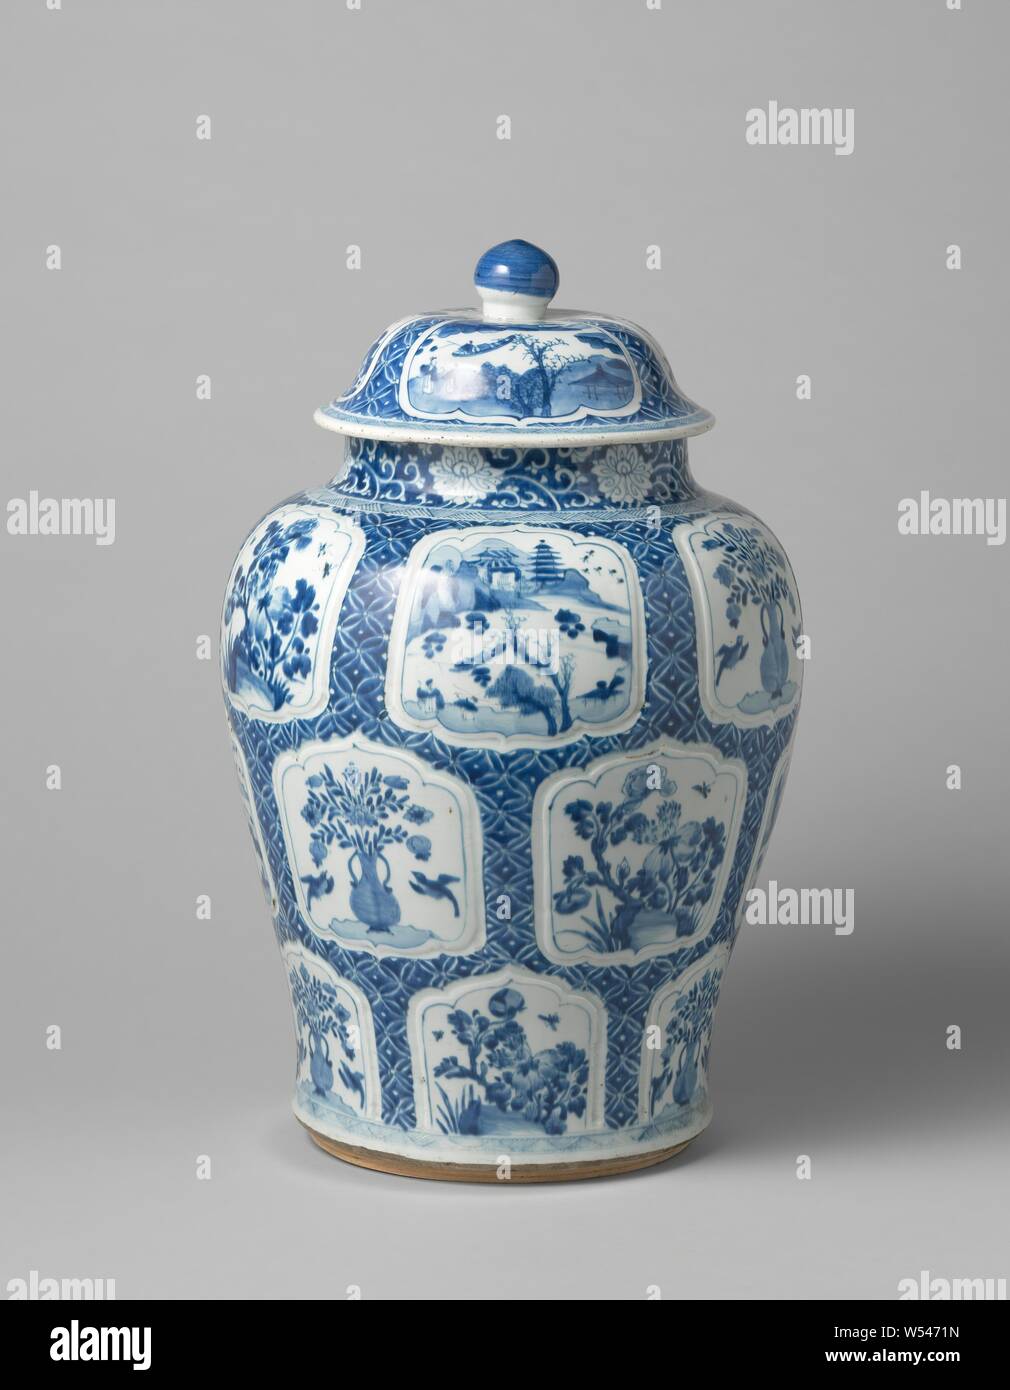 Baluster covered jar with flower vases, flowering plants and landscapes in  panels, Baluster-shaped porcelain covered pot, painted in underglaze blue.  The belly is covered with napkin work containing saved, modeled, scalloped  cartouches